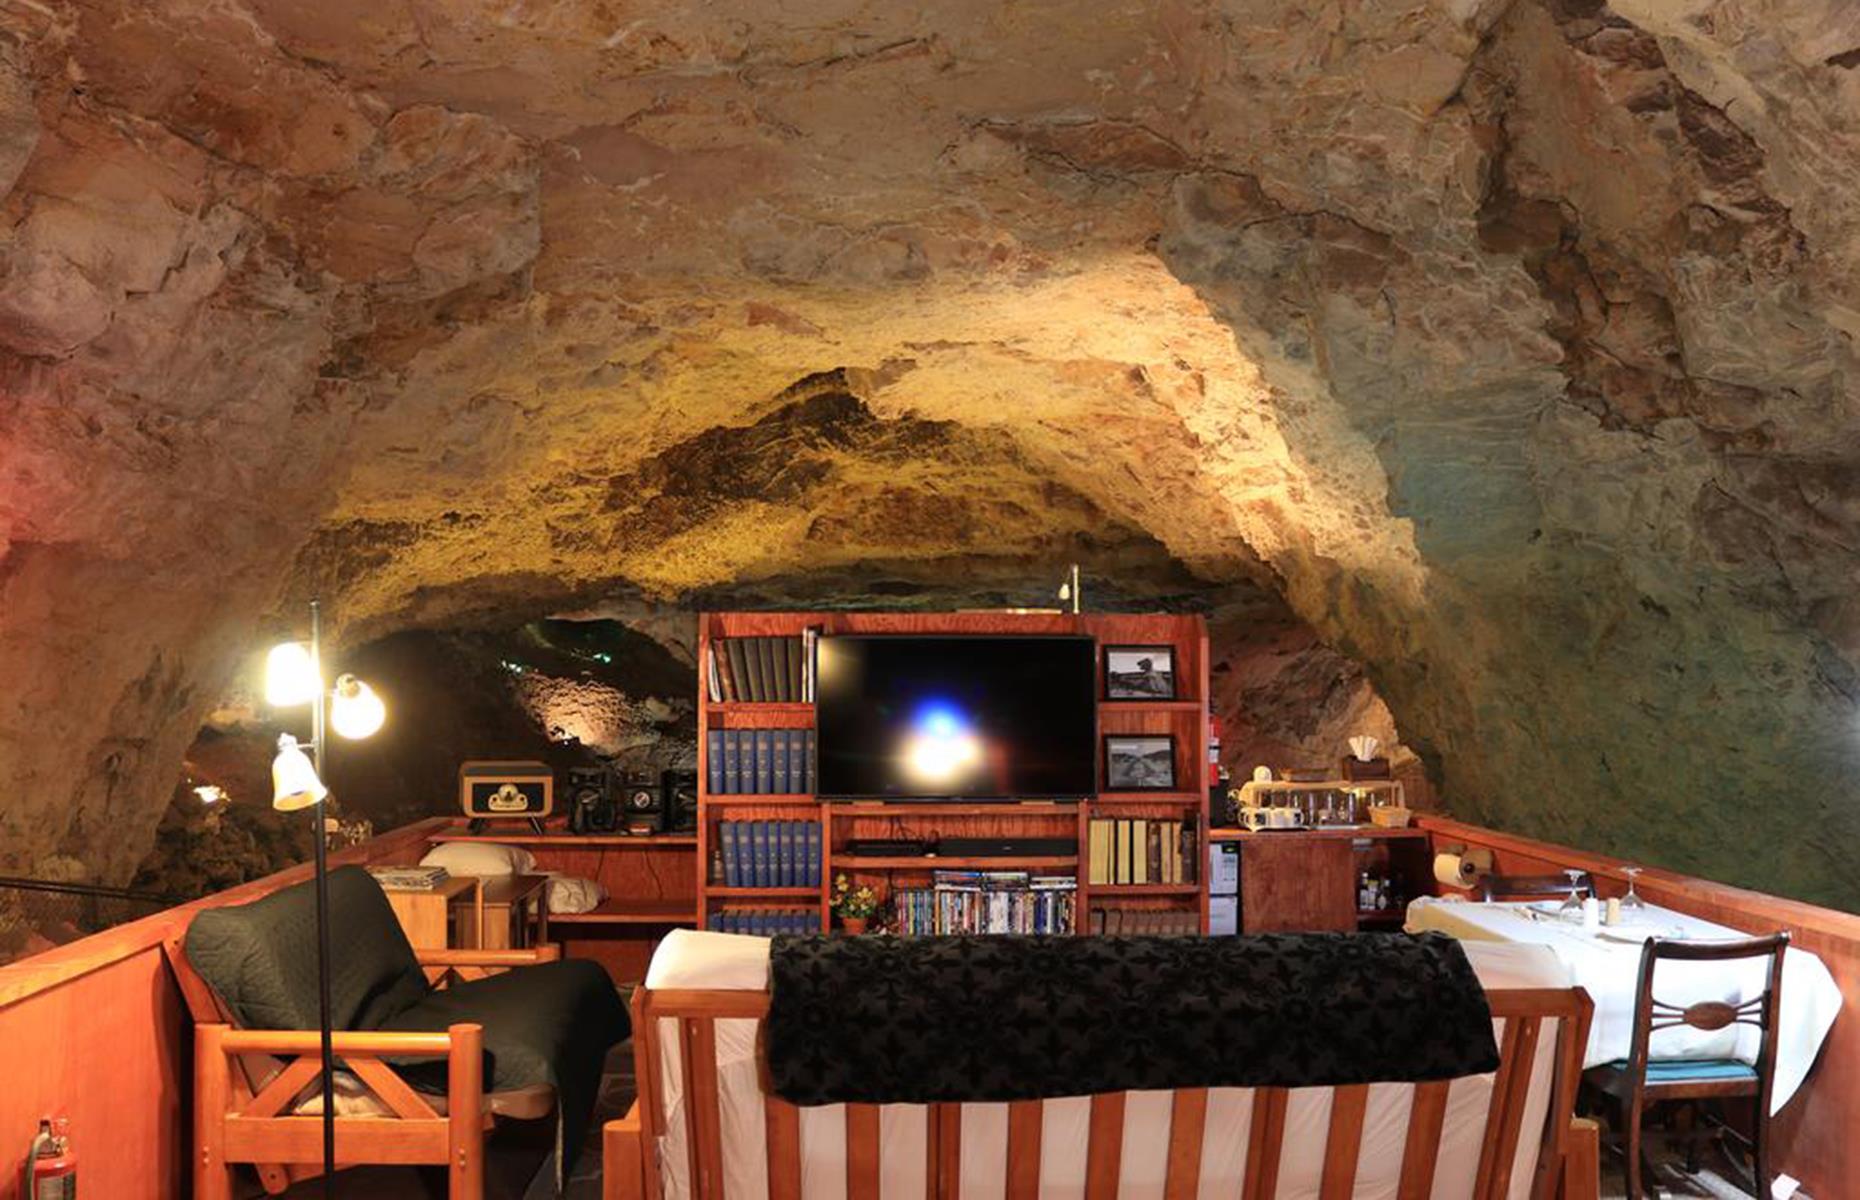 <p>Although most of this wonderfully retro inn is situated above ground, there is one special room hiding deep underground. The Cavern Suite sits 200 feet (61m) beneath the earth, and is billed as "the world's darkest, quietest and deepest hotel room". There's two queen beds, a functional bathroom, a wide array of books, a TV and even a kitchenette. While you're there, take the opportunity to visit the sprawling caverns themselves (although tours are temporarily unavailable).</p>